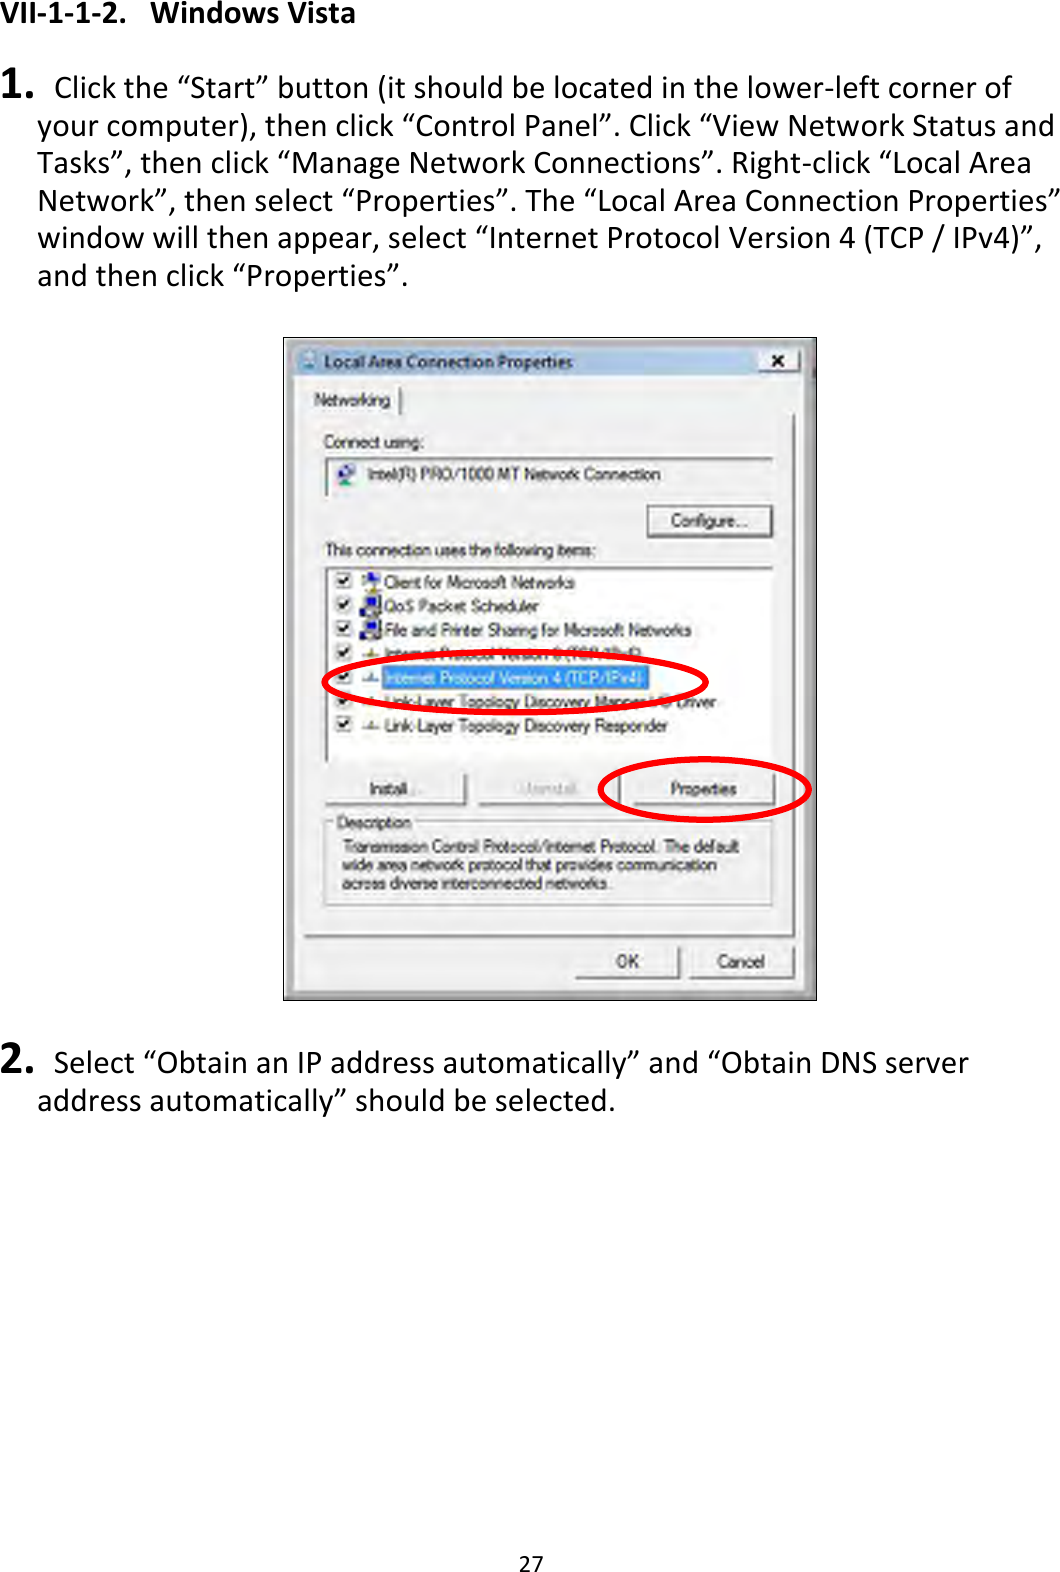 27 VII-1-1-2.  Windows Vista  1.  Click the “Start” button (it should be located in the lower-left corner of your computer), then click “Control Panel”. Click “View Network Status and Tasks”, then click “Manage Network Connections”. Right-click “Local Area Network”, then select “Properties”. The “Local Area Connection Properties” window will then appear, select “Internet Protocol Version 4 (TCP / IPv4)”, and then click “Properties”.    2.  Select “Obtain an IP address automatically” and “Obtain DNS server address automatically” should be selected. 